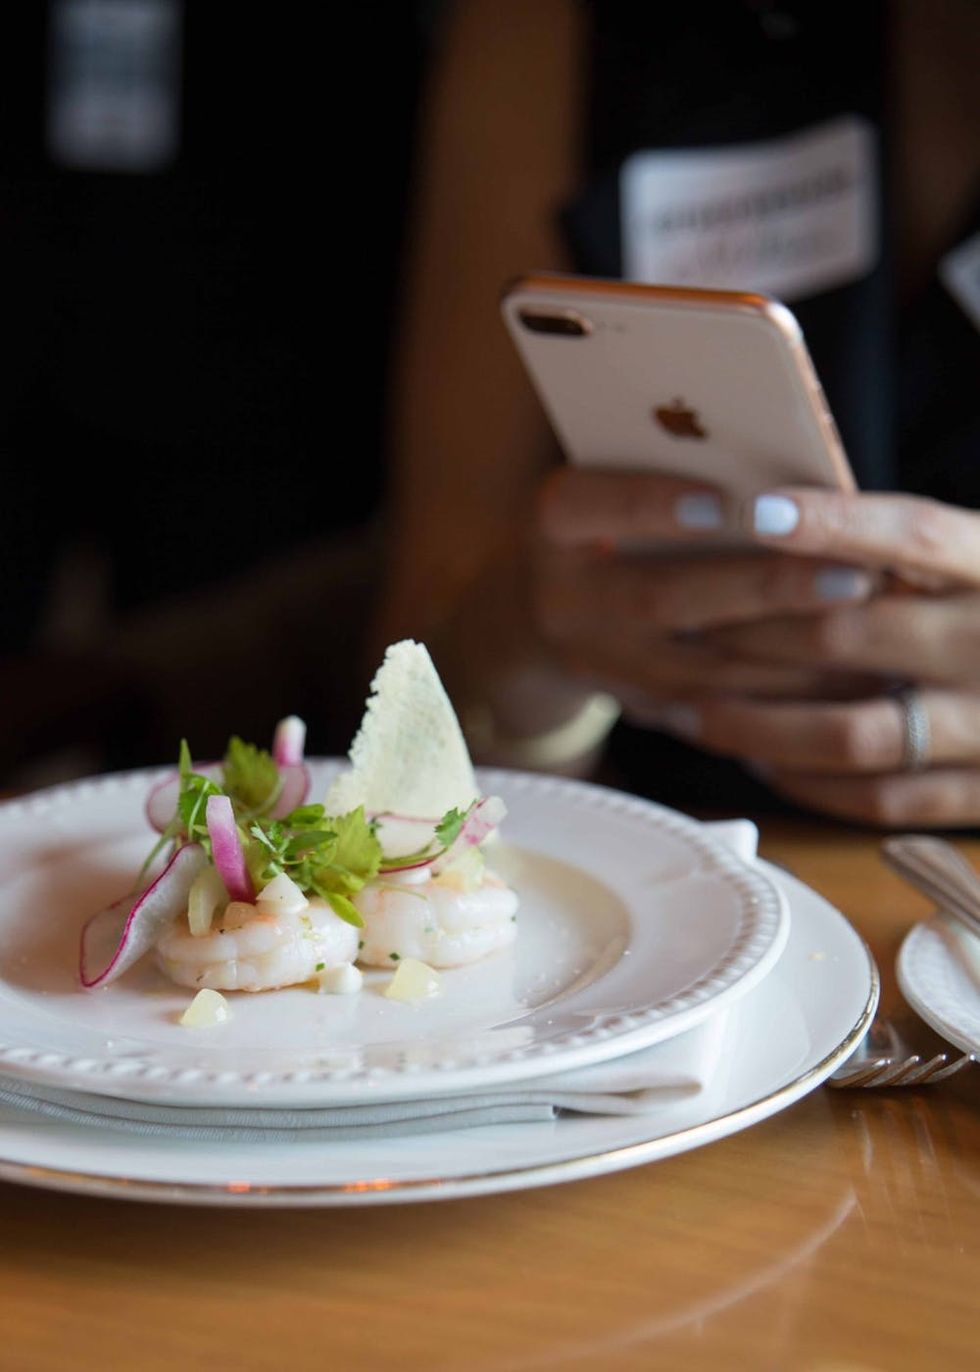 Using editing apps on your phone can take your food photos for Instagram over the top.